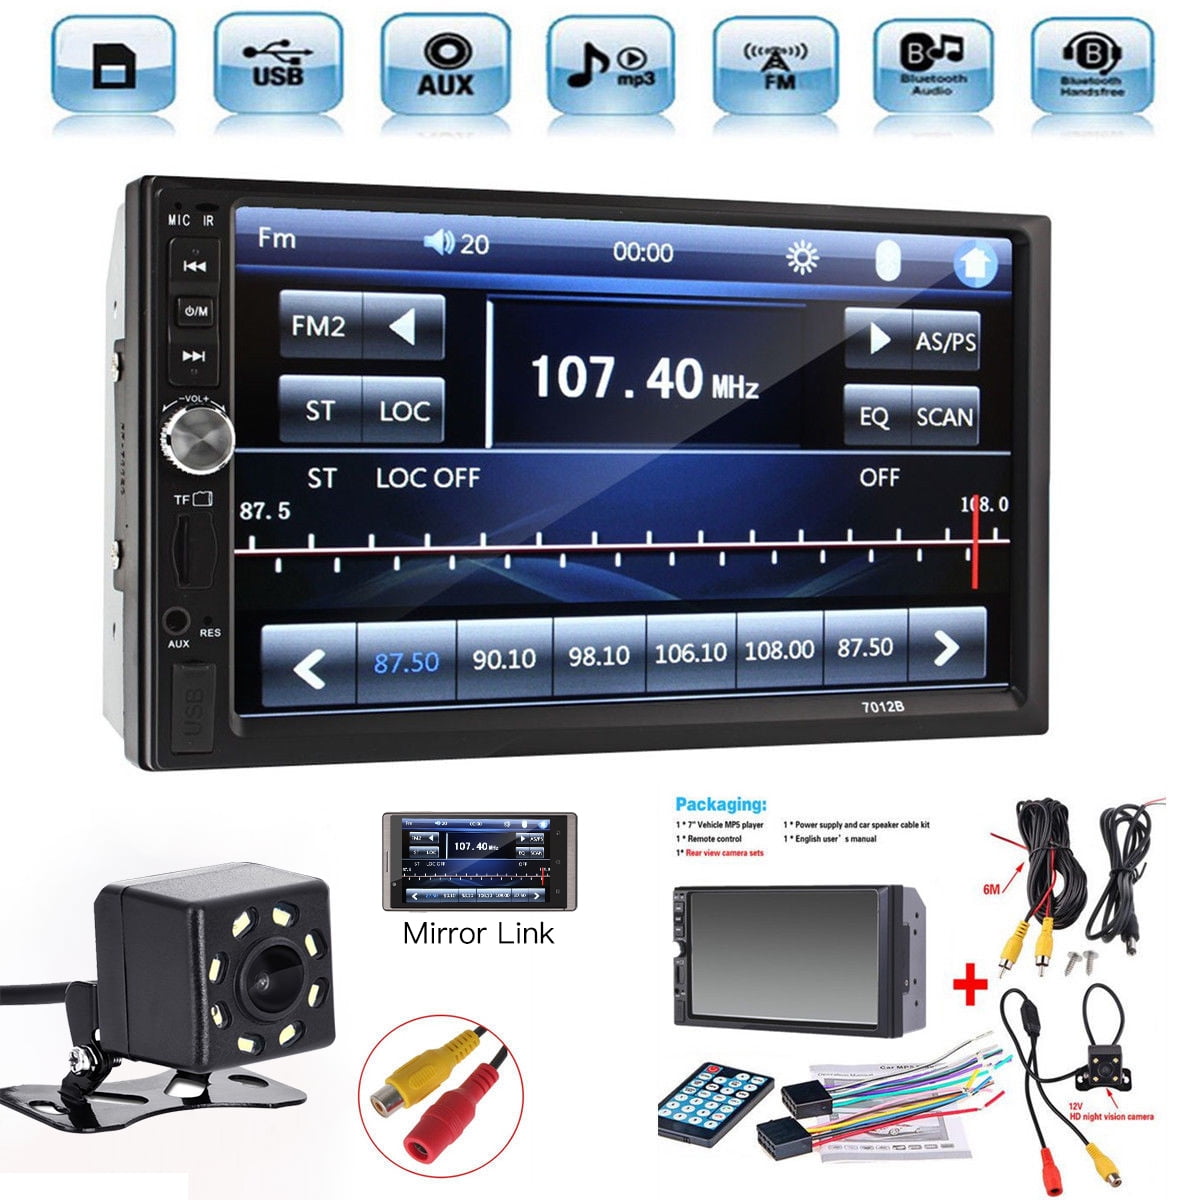 7" Touch Screen Car TV FM Bluetooth Stereo Radio Video MP5 Player USB/AUX Device 